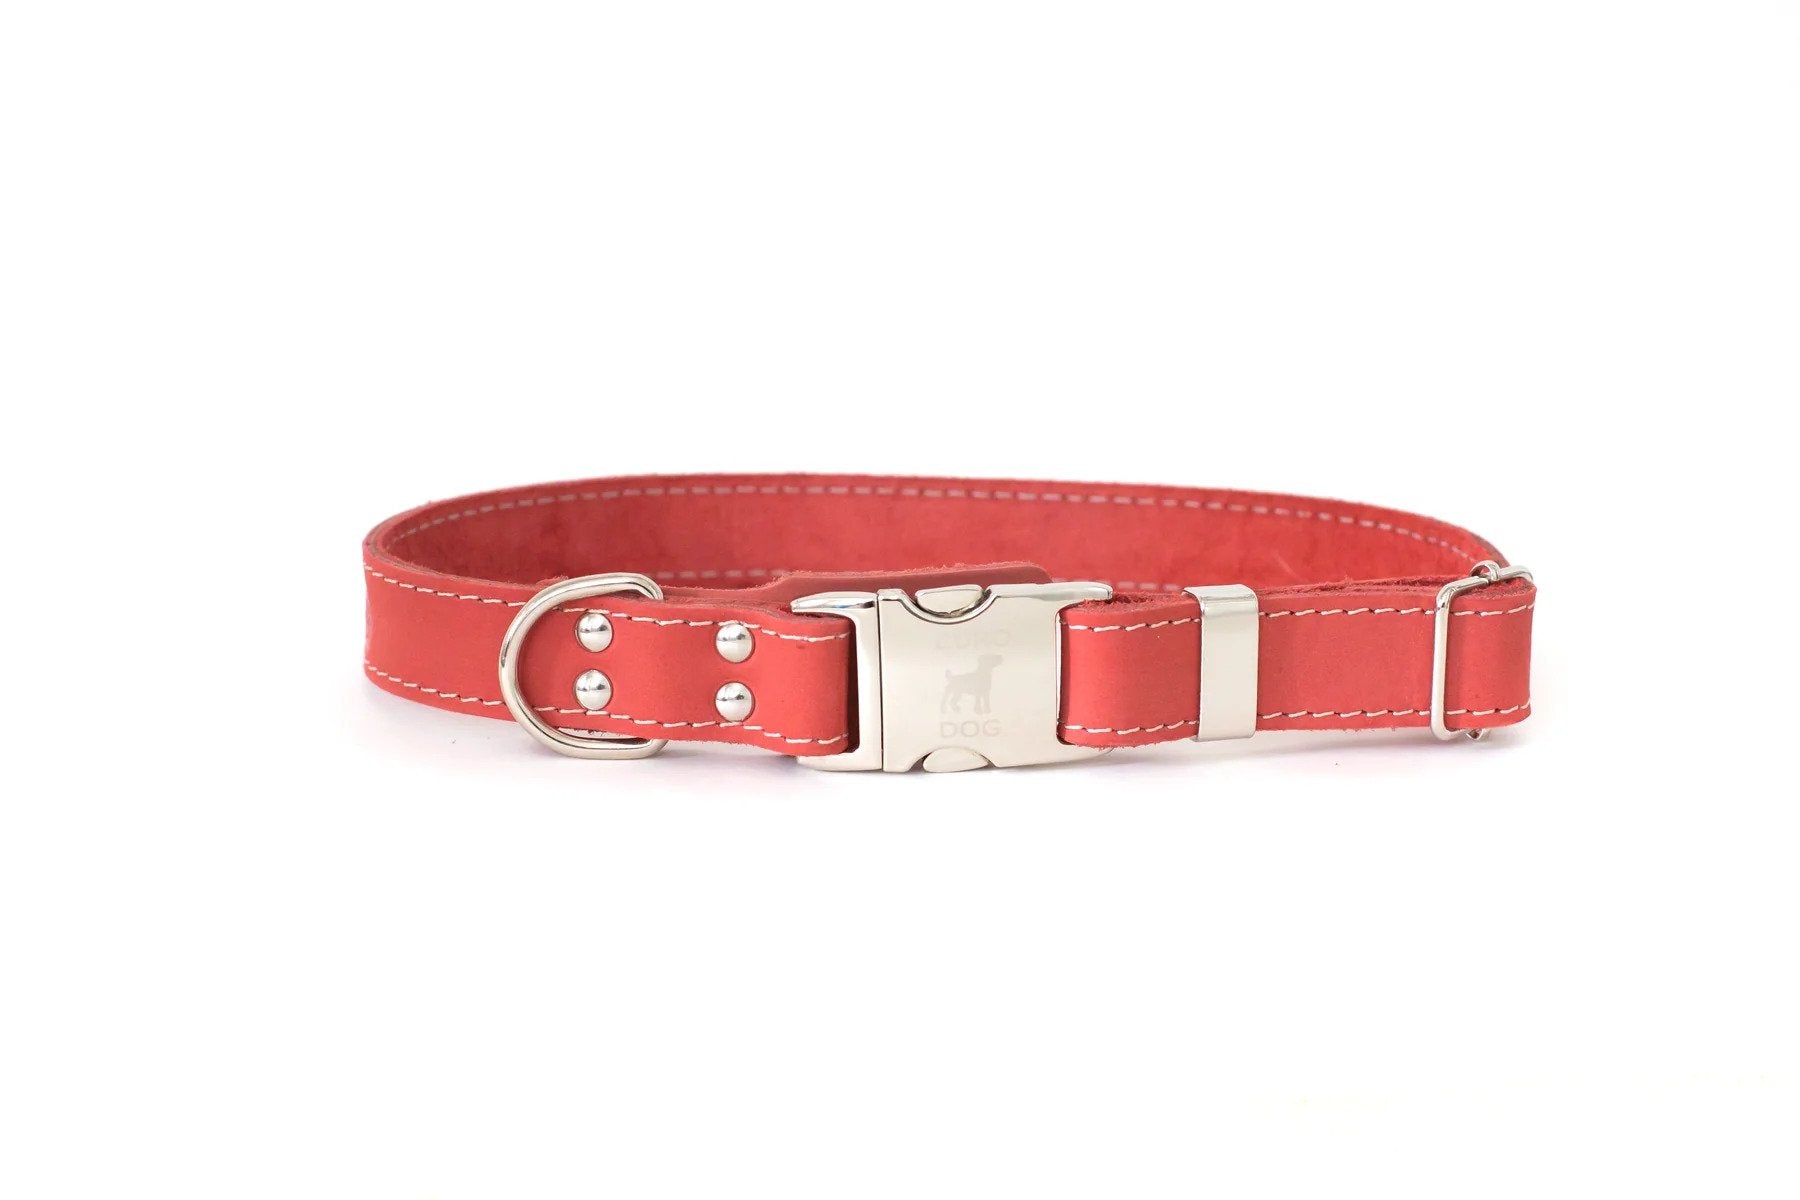 Eurodog Collars Soft Leather Metal Quick-Release Buckle Dog Collar Coral